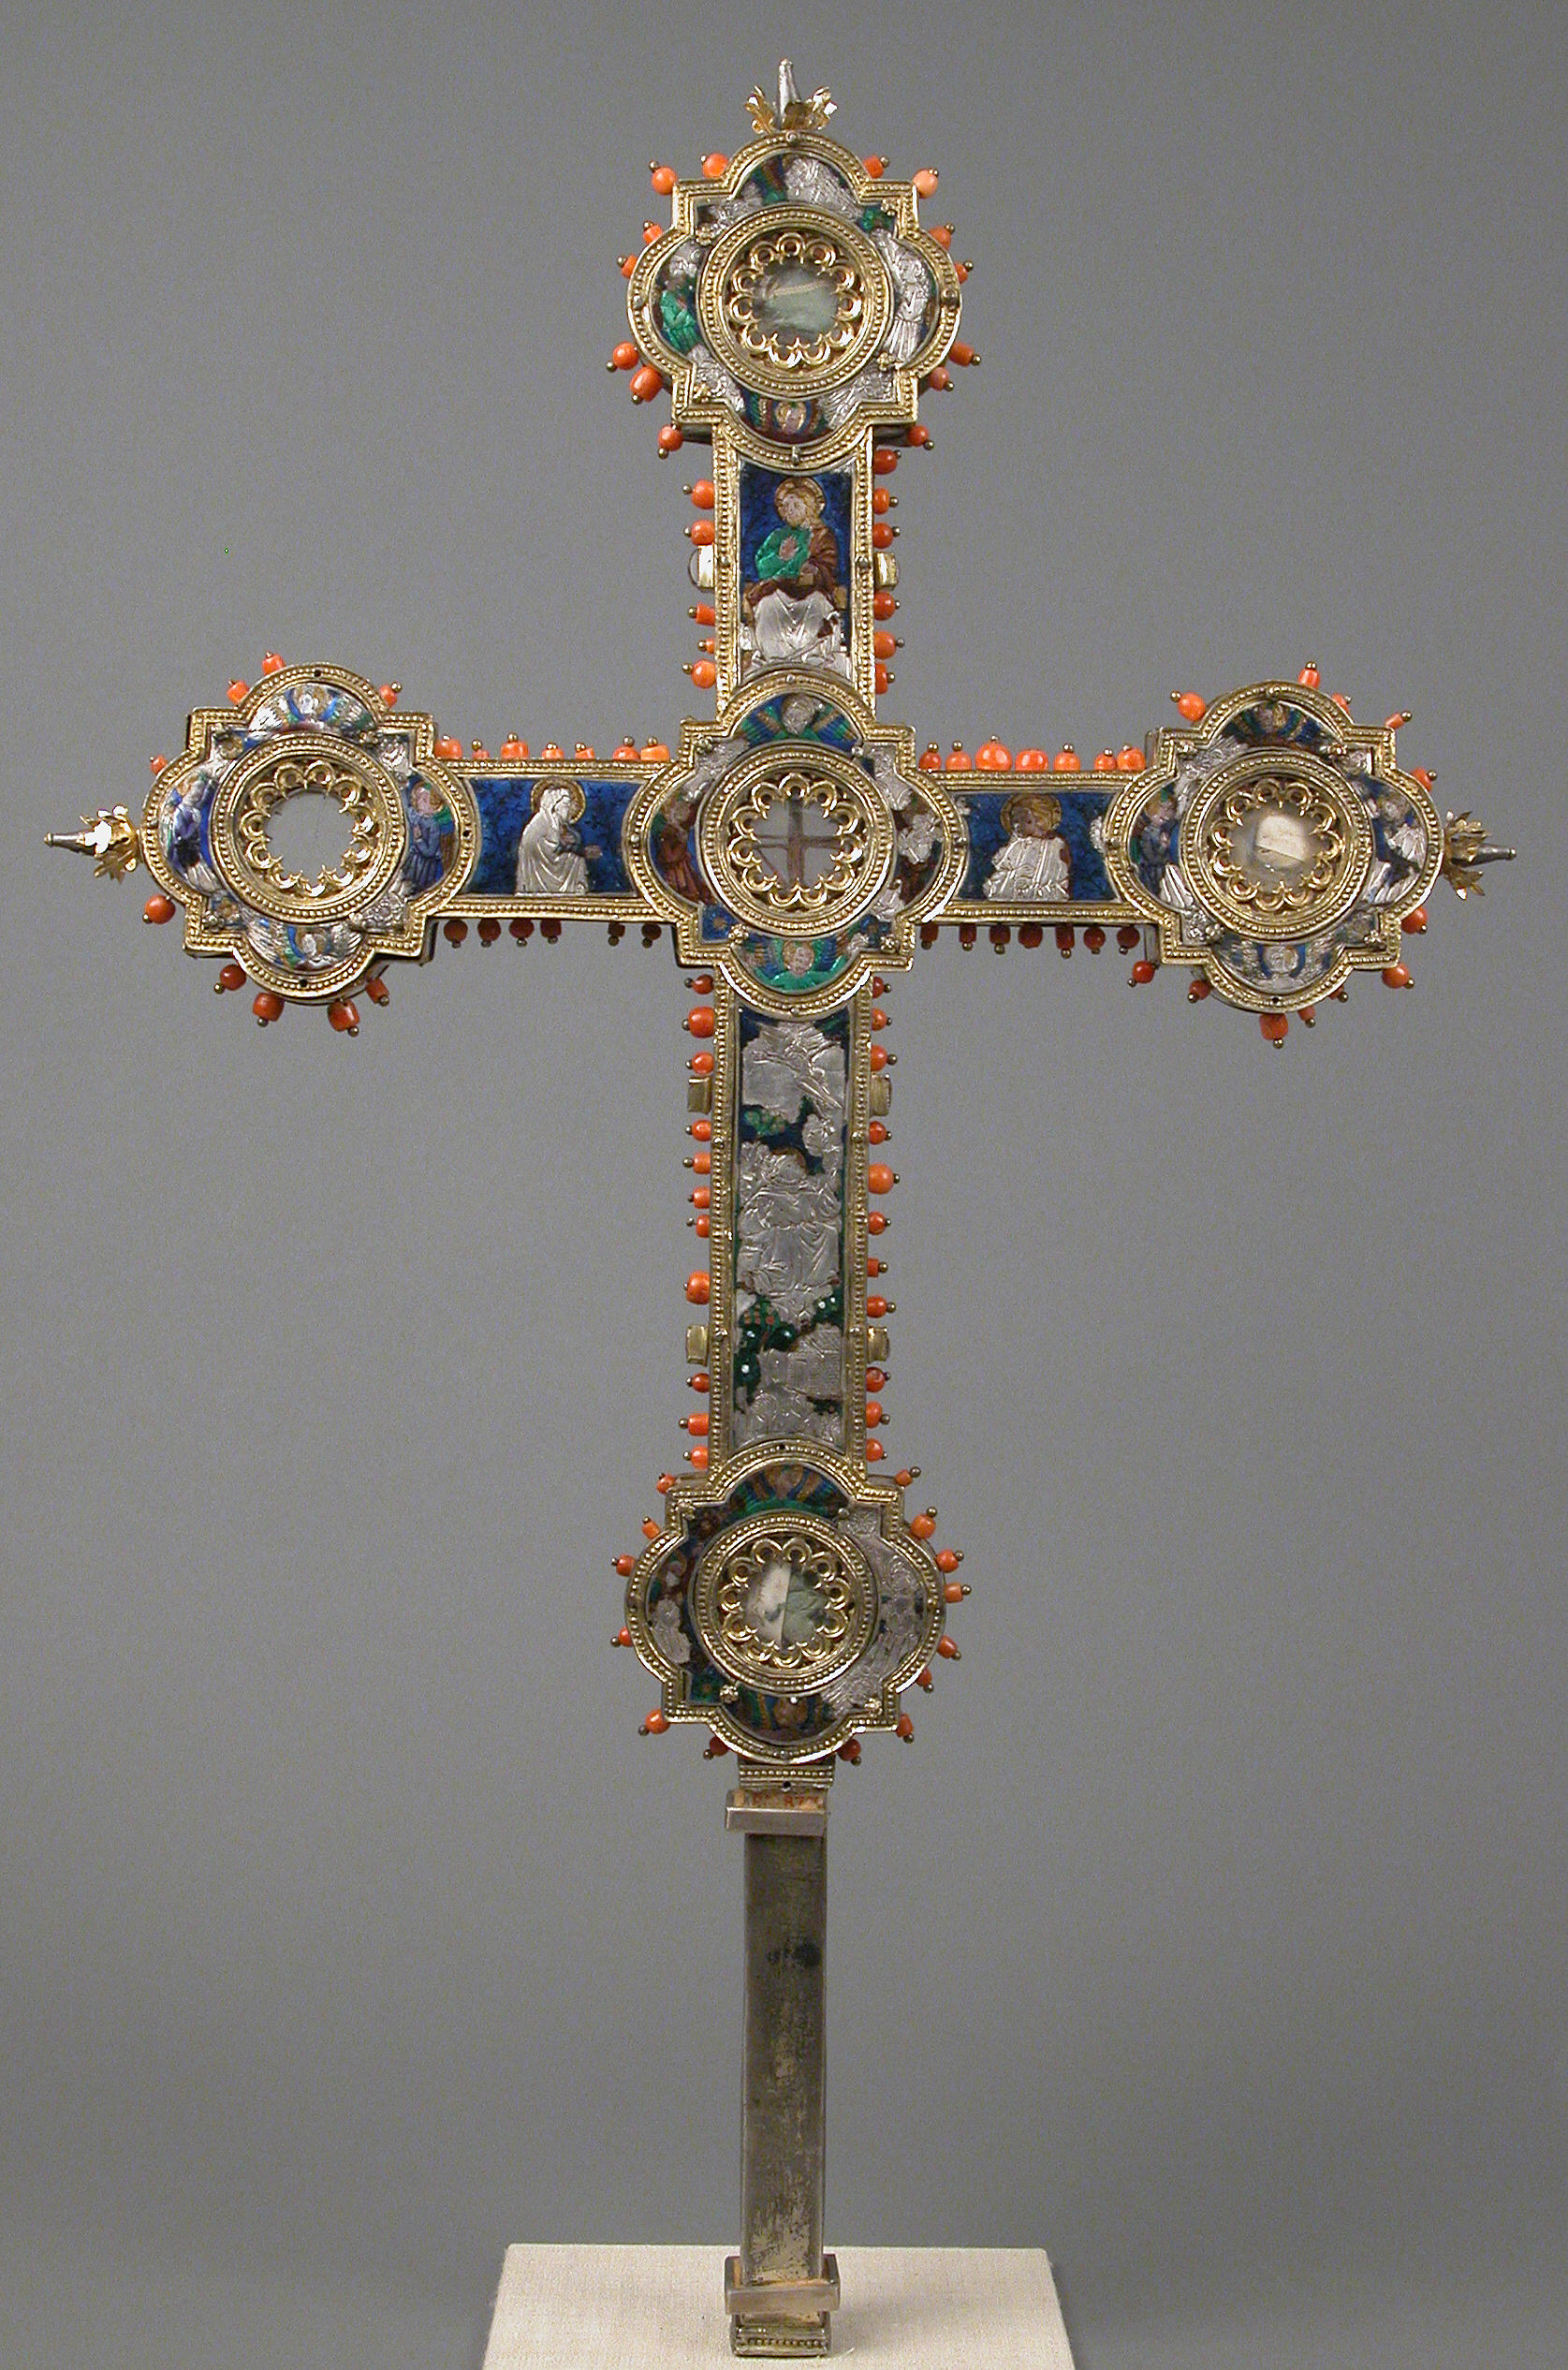 Reliquary Cross (The Cloisters) - Wikipedia